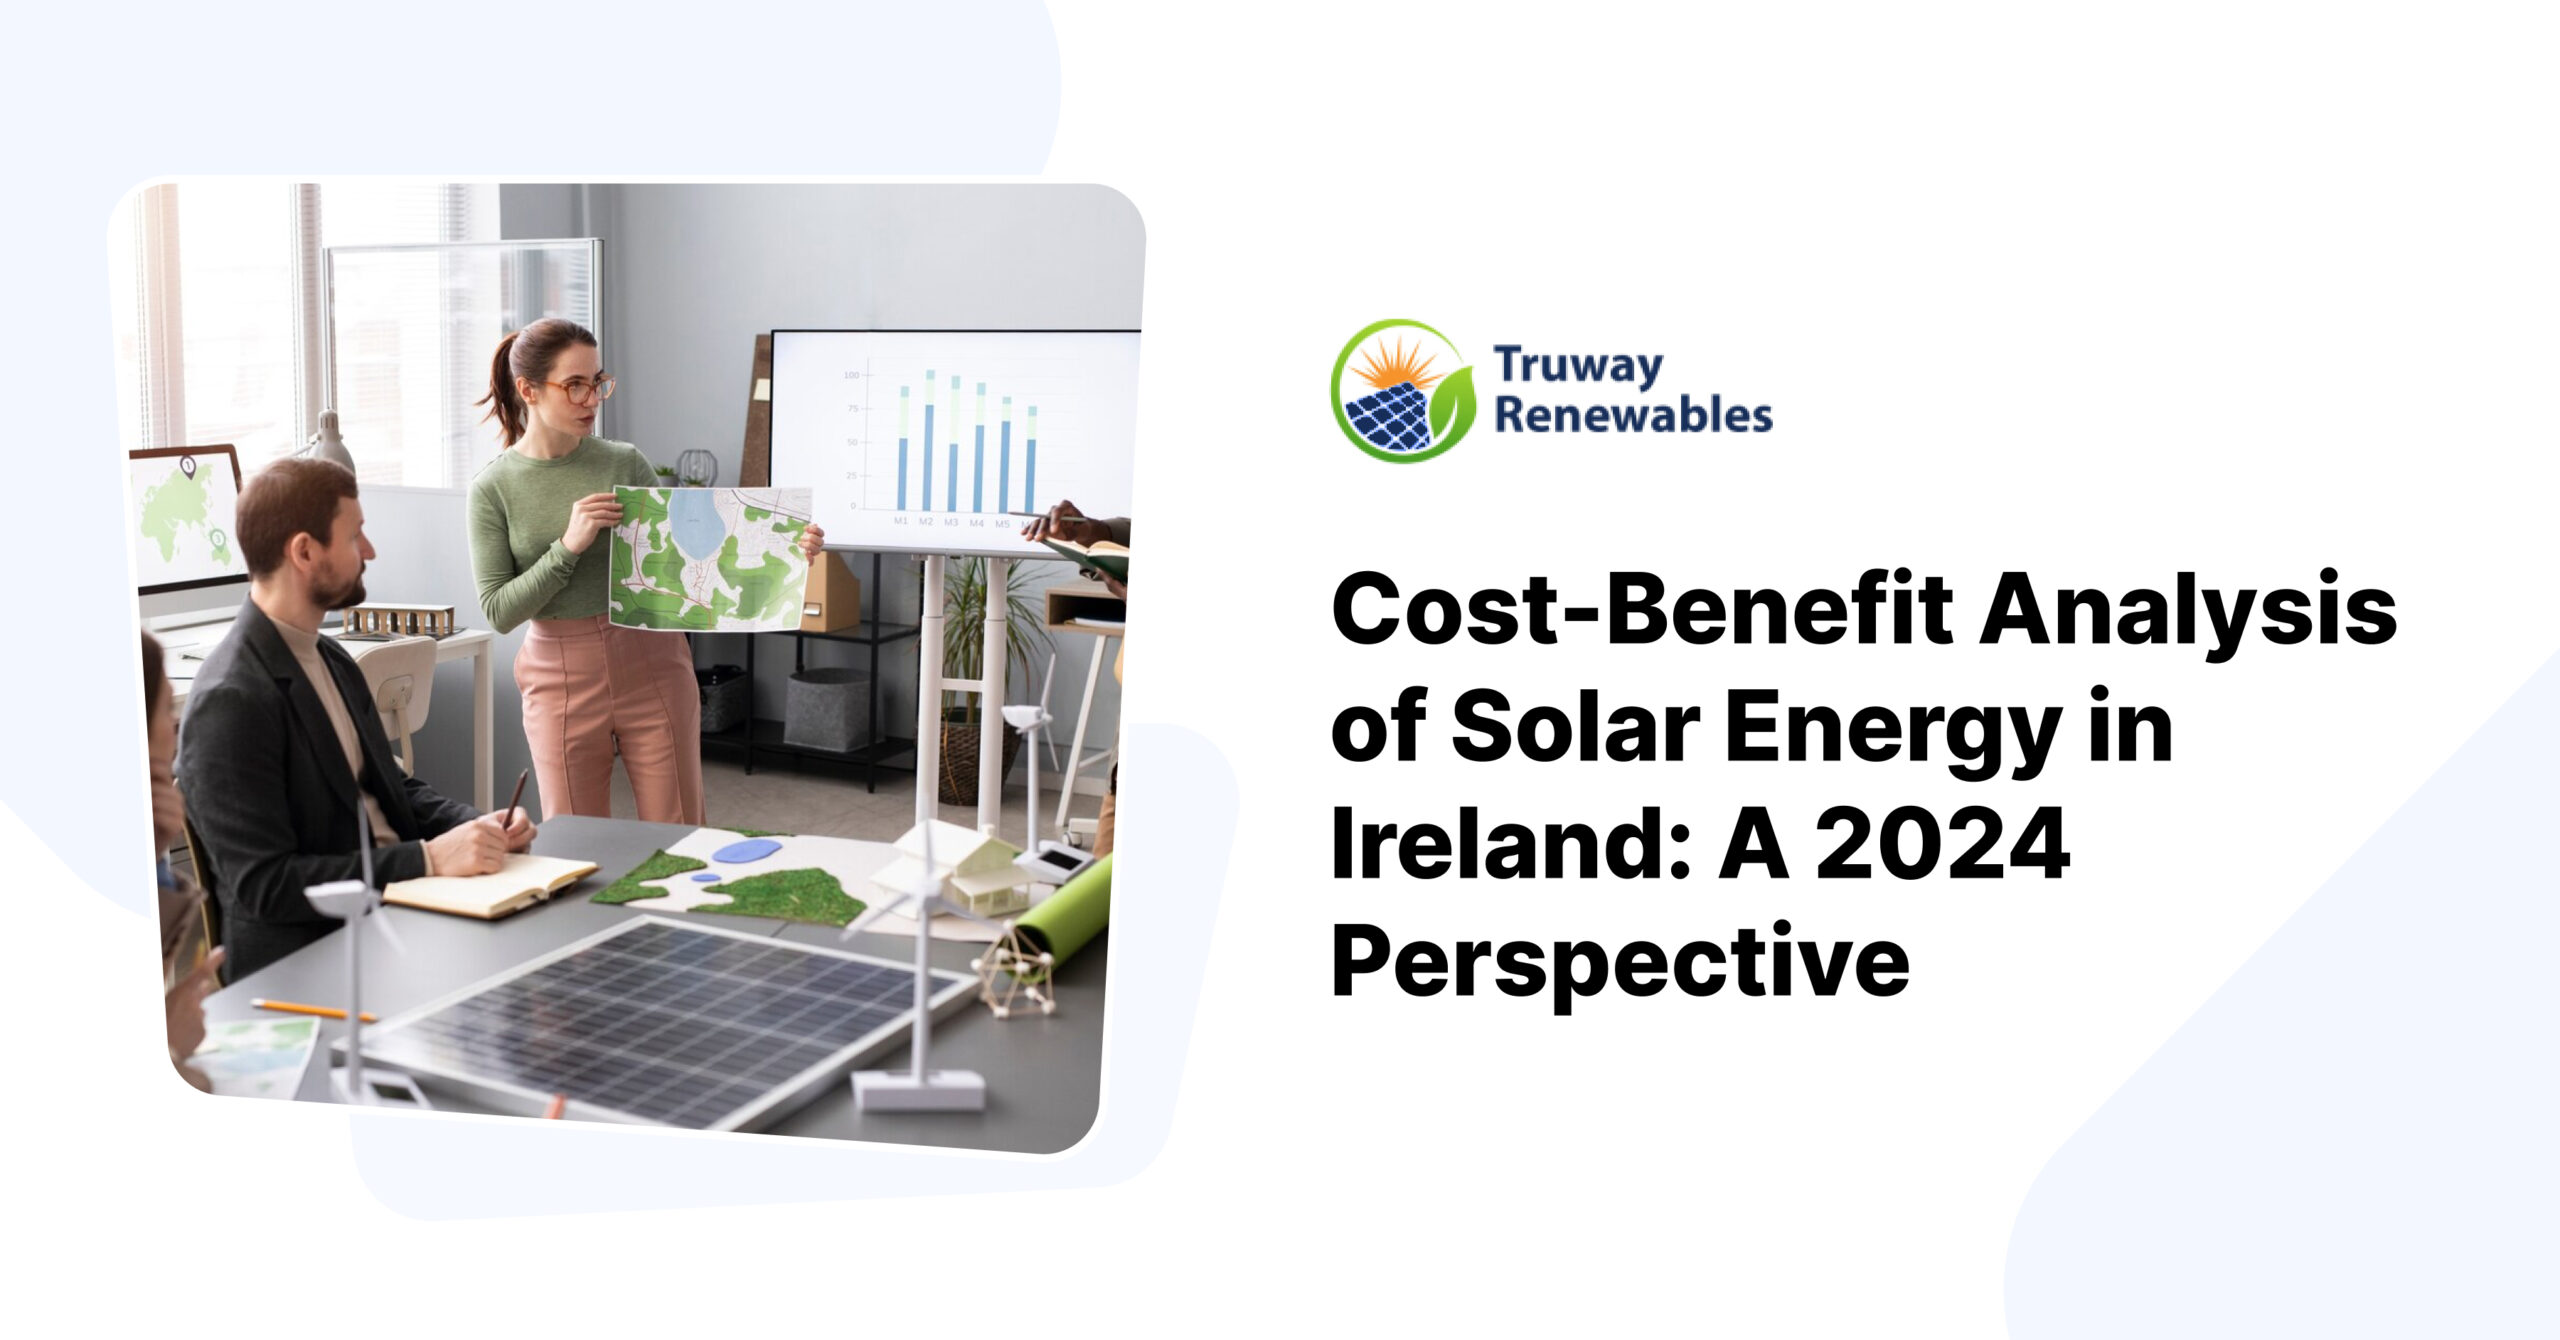 Cost-Benefit Analysis of Solar Energy in Ireland: A 2024 Perspective